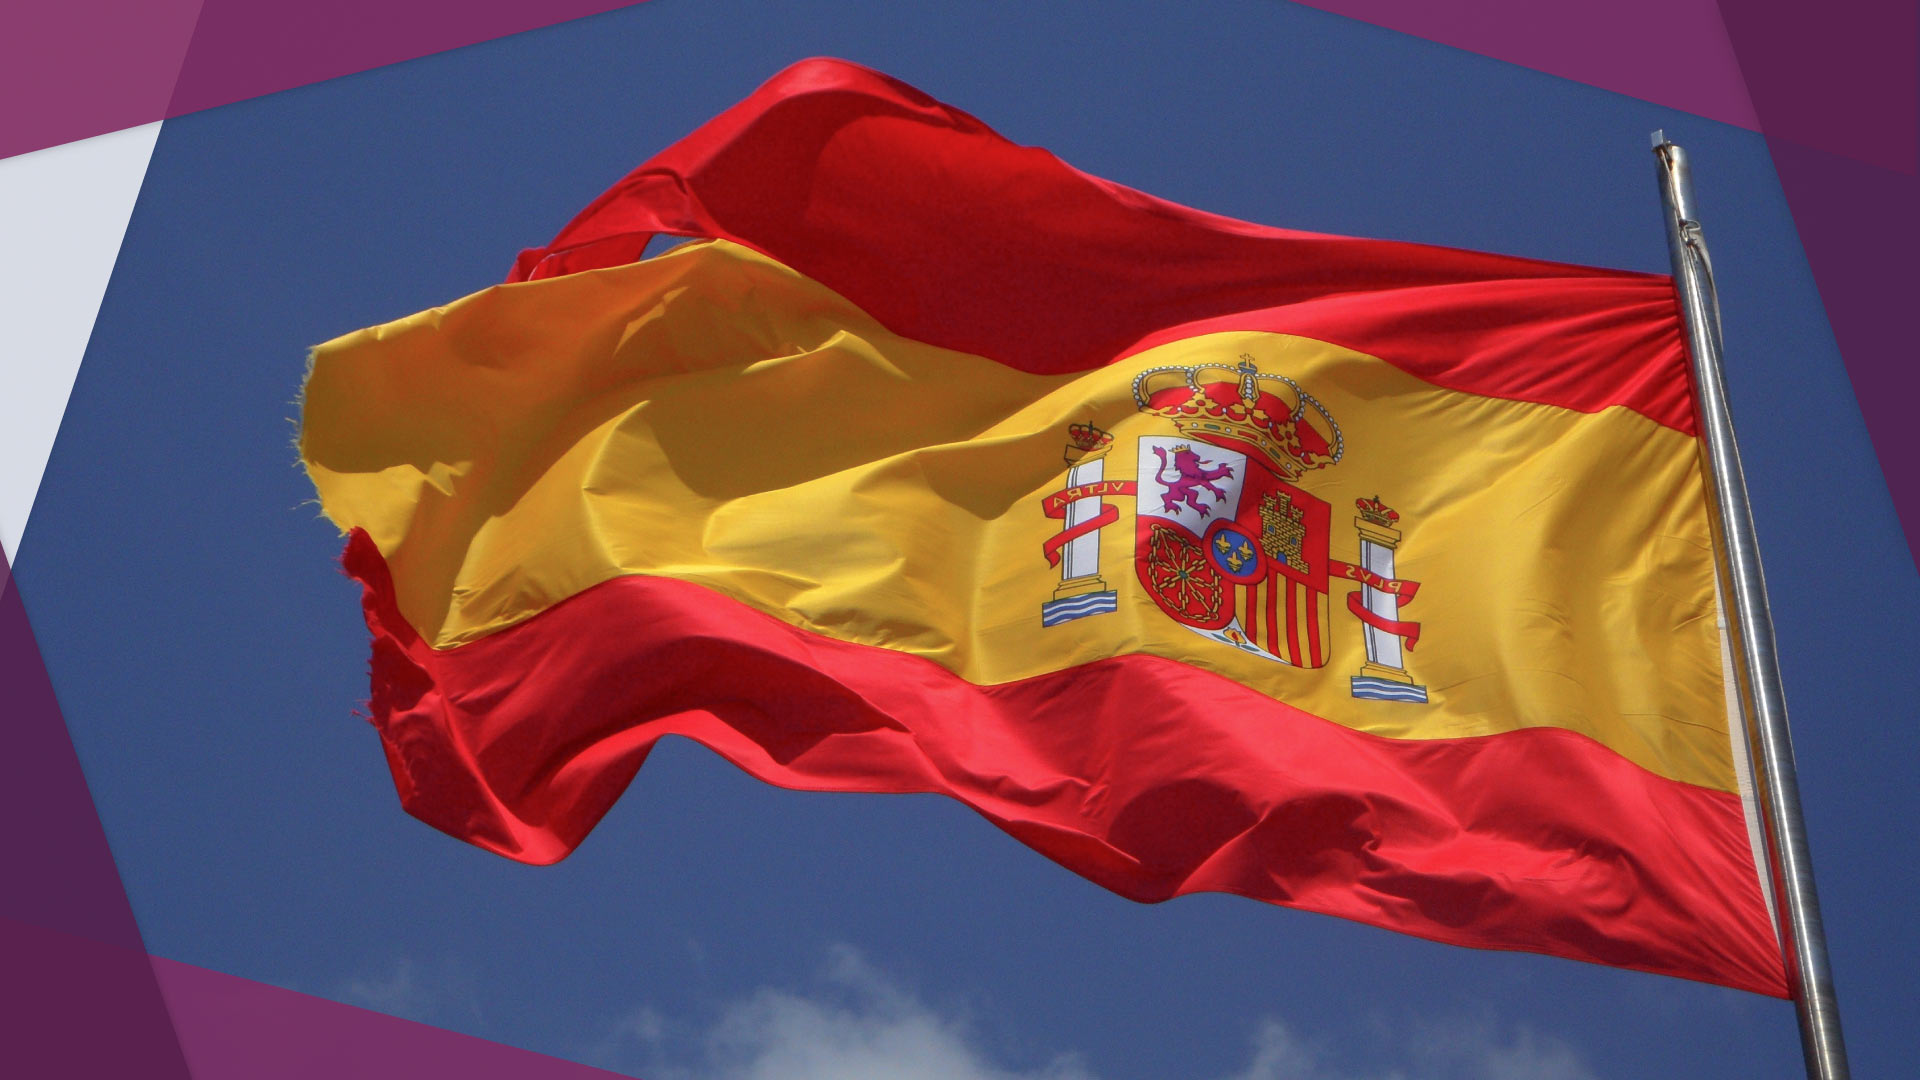 Most promising startups from Spain. They develop fast and go global! - Image